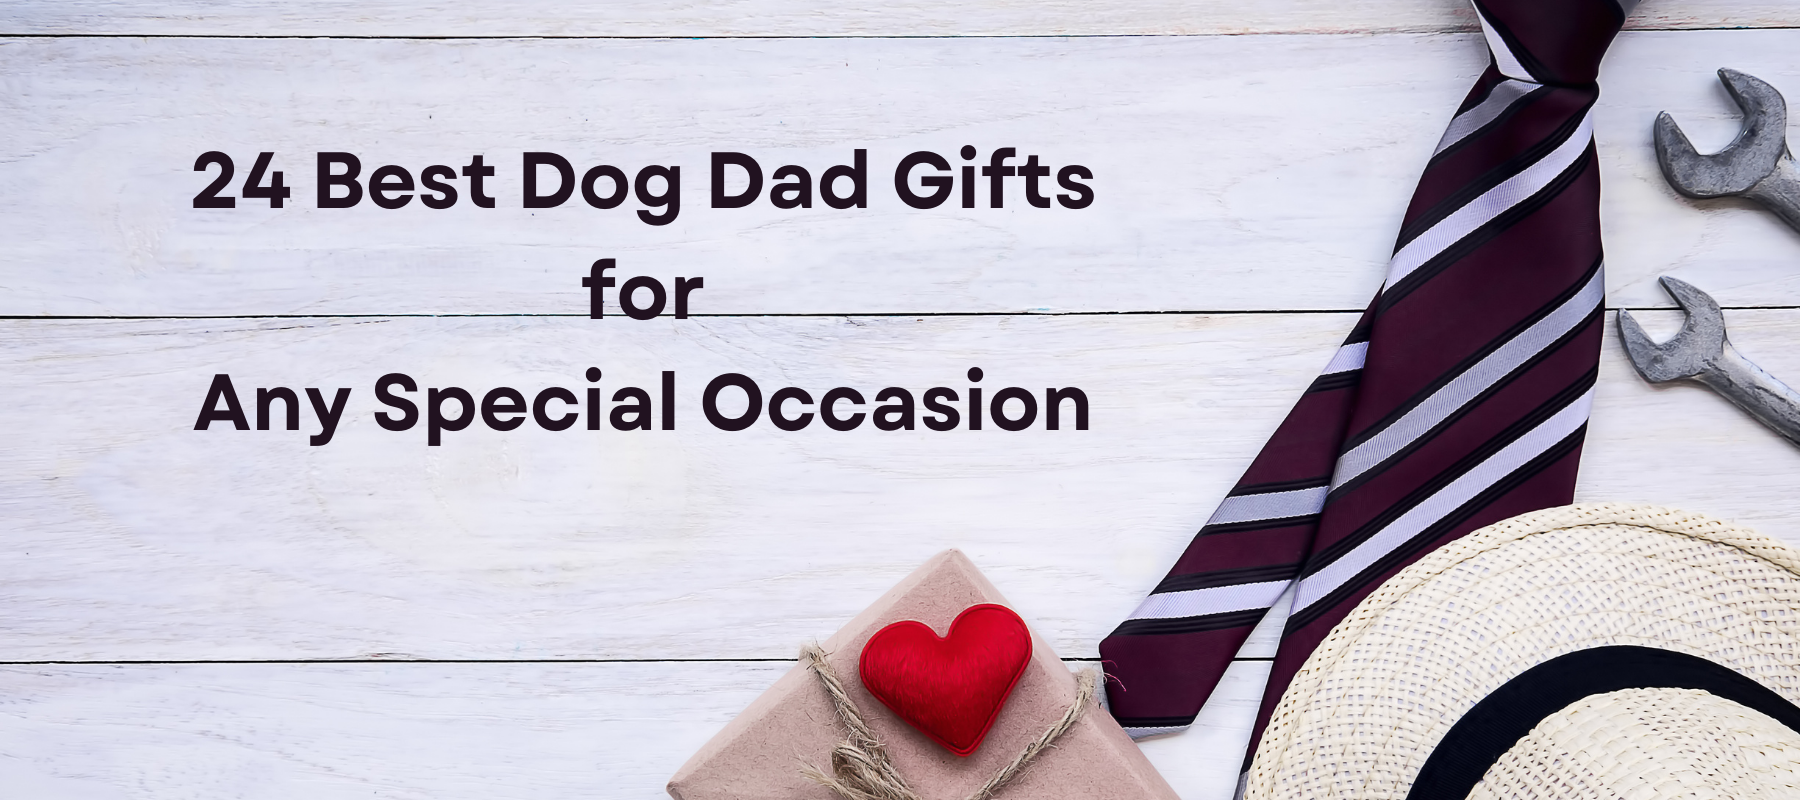 24 Best Dog Dad Gifts for Any Special Occasion